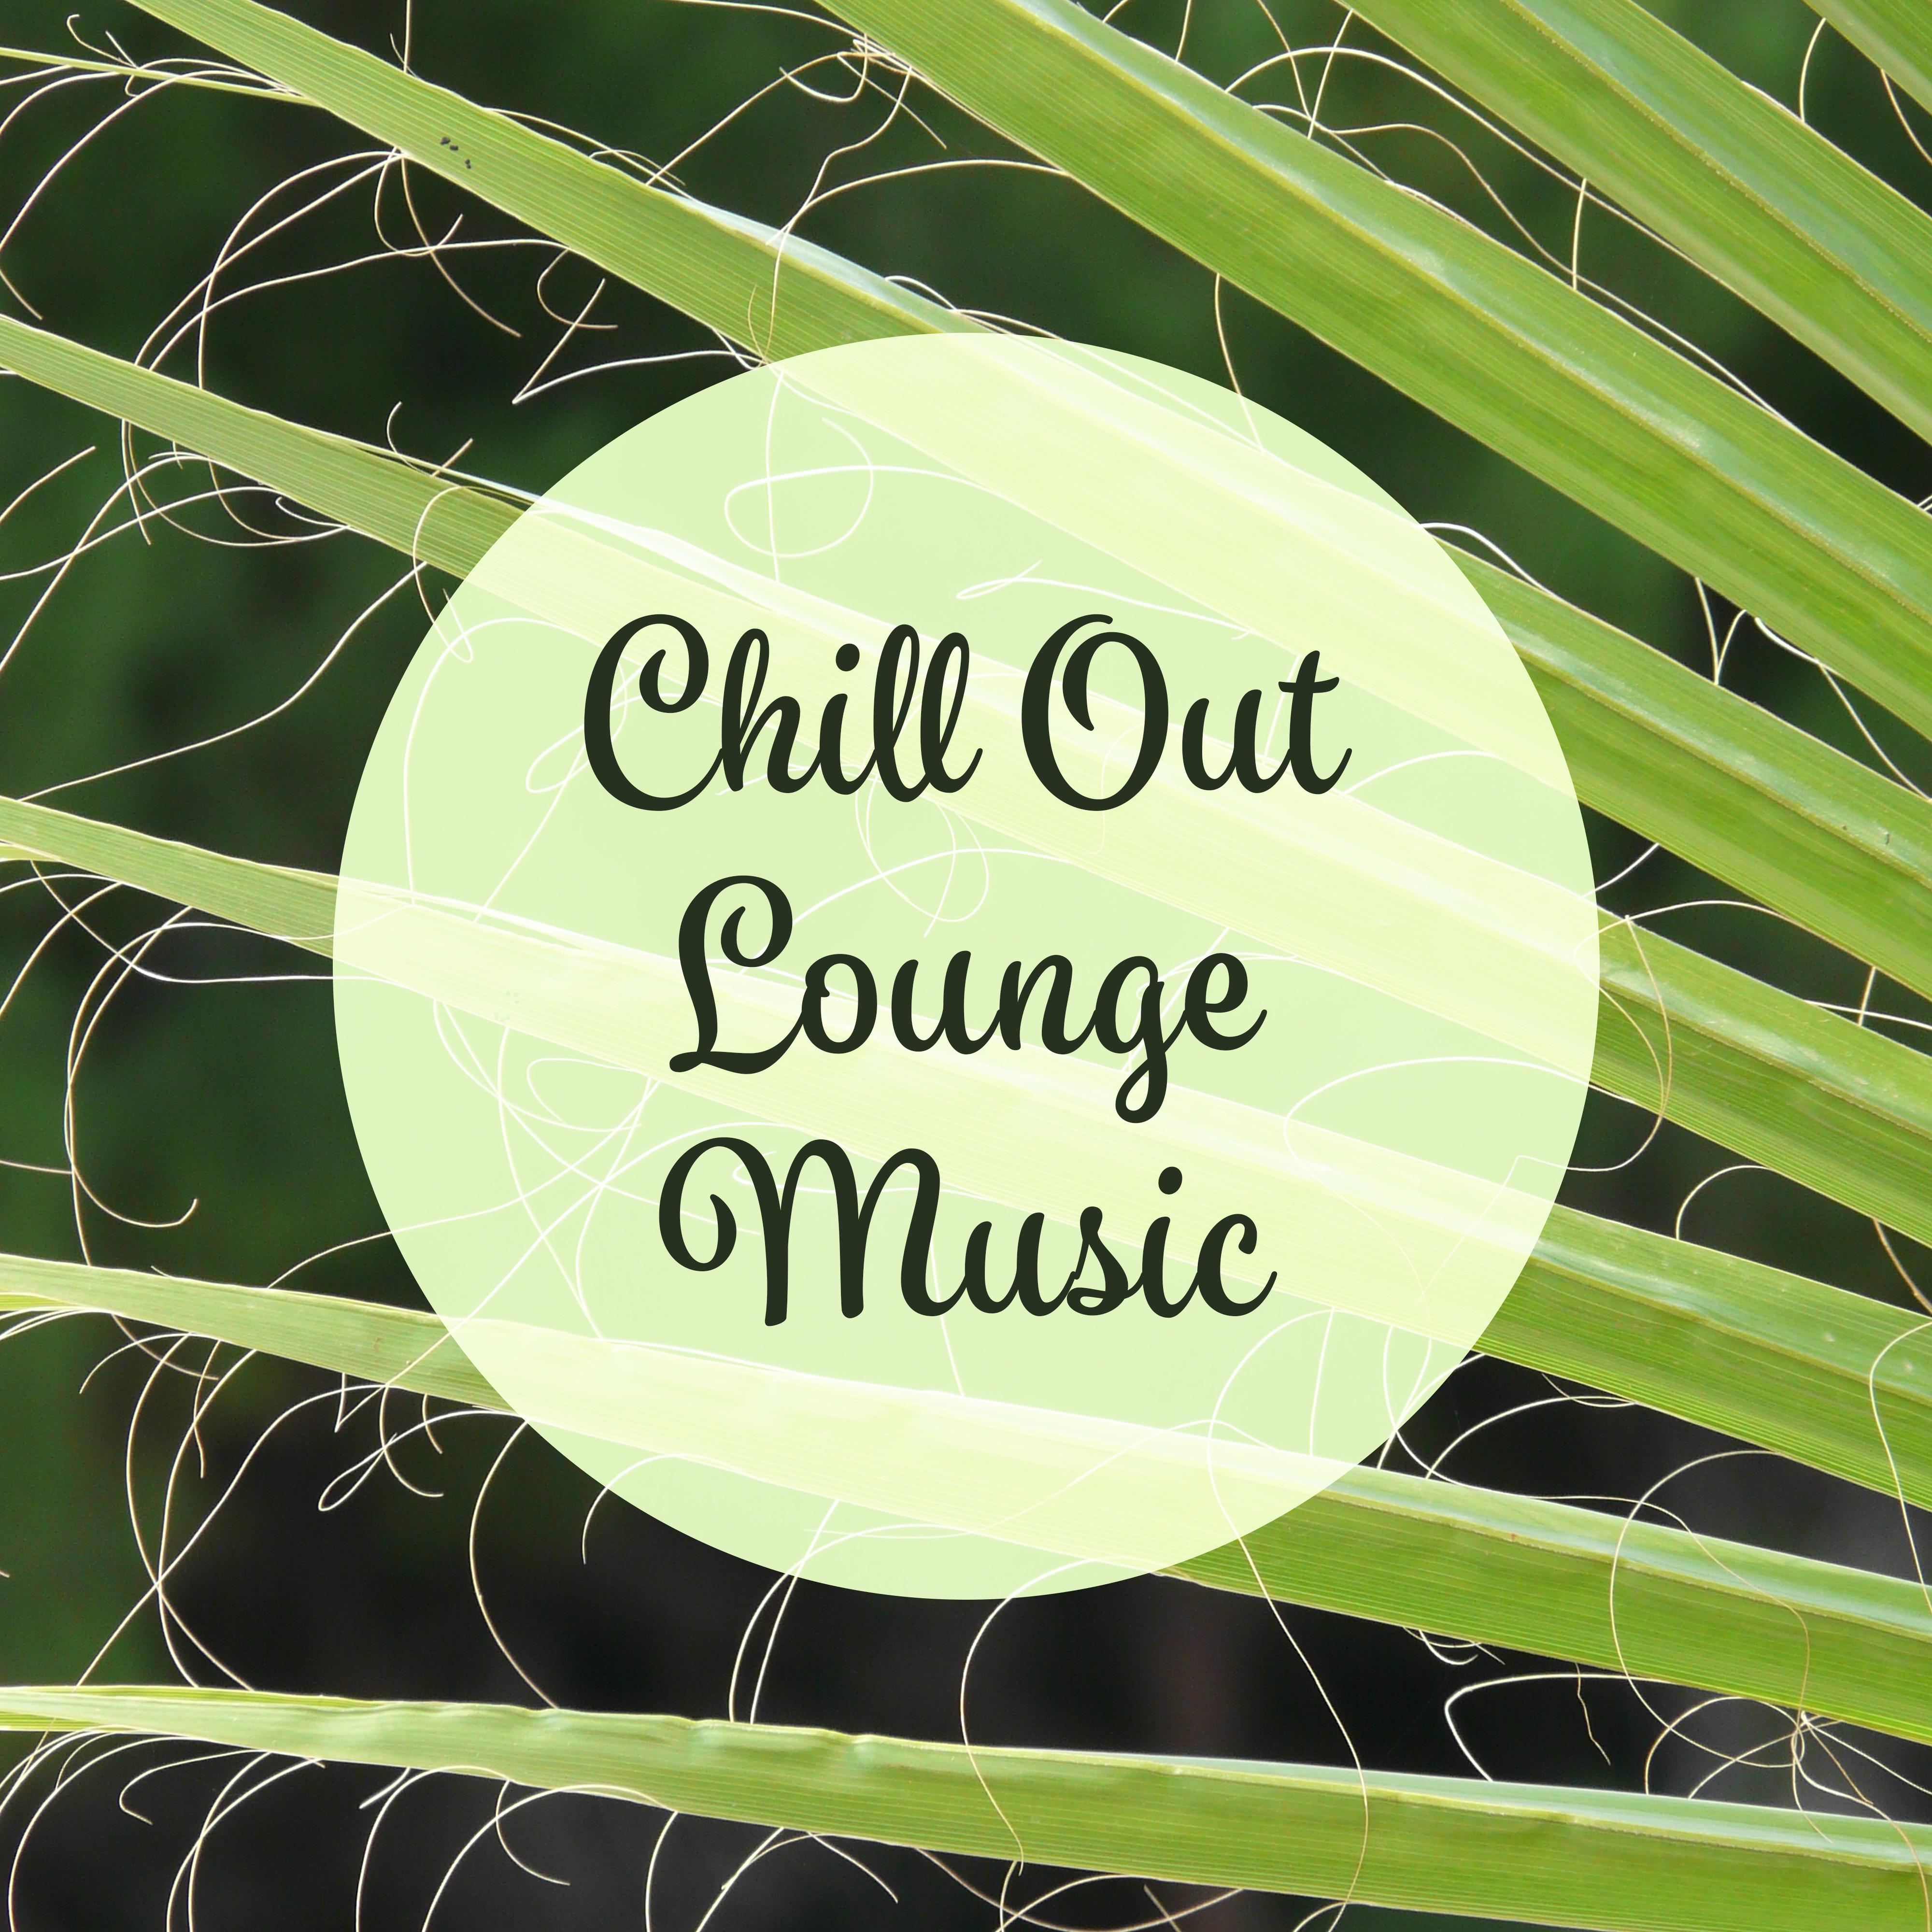 Chill Out Lounge Music – Rest with Summer Songs, Inner Relaxation, Beach House Music, Sounds to Calm Down